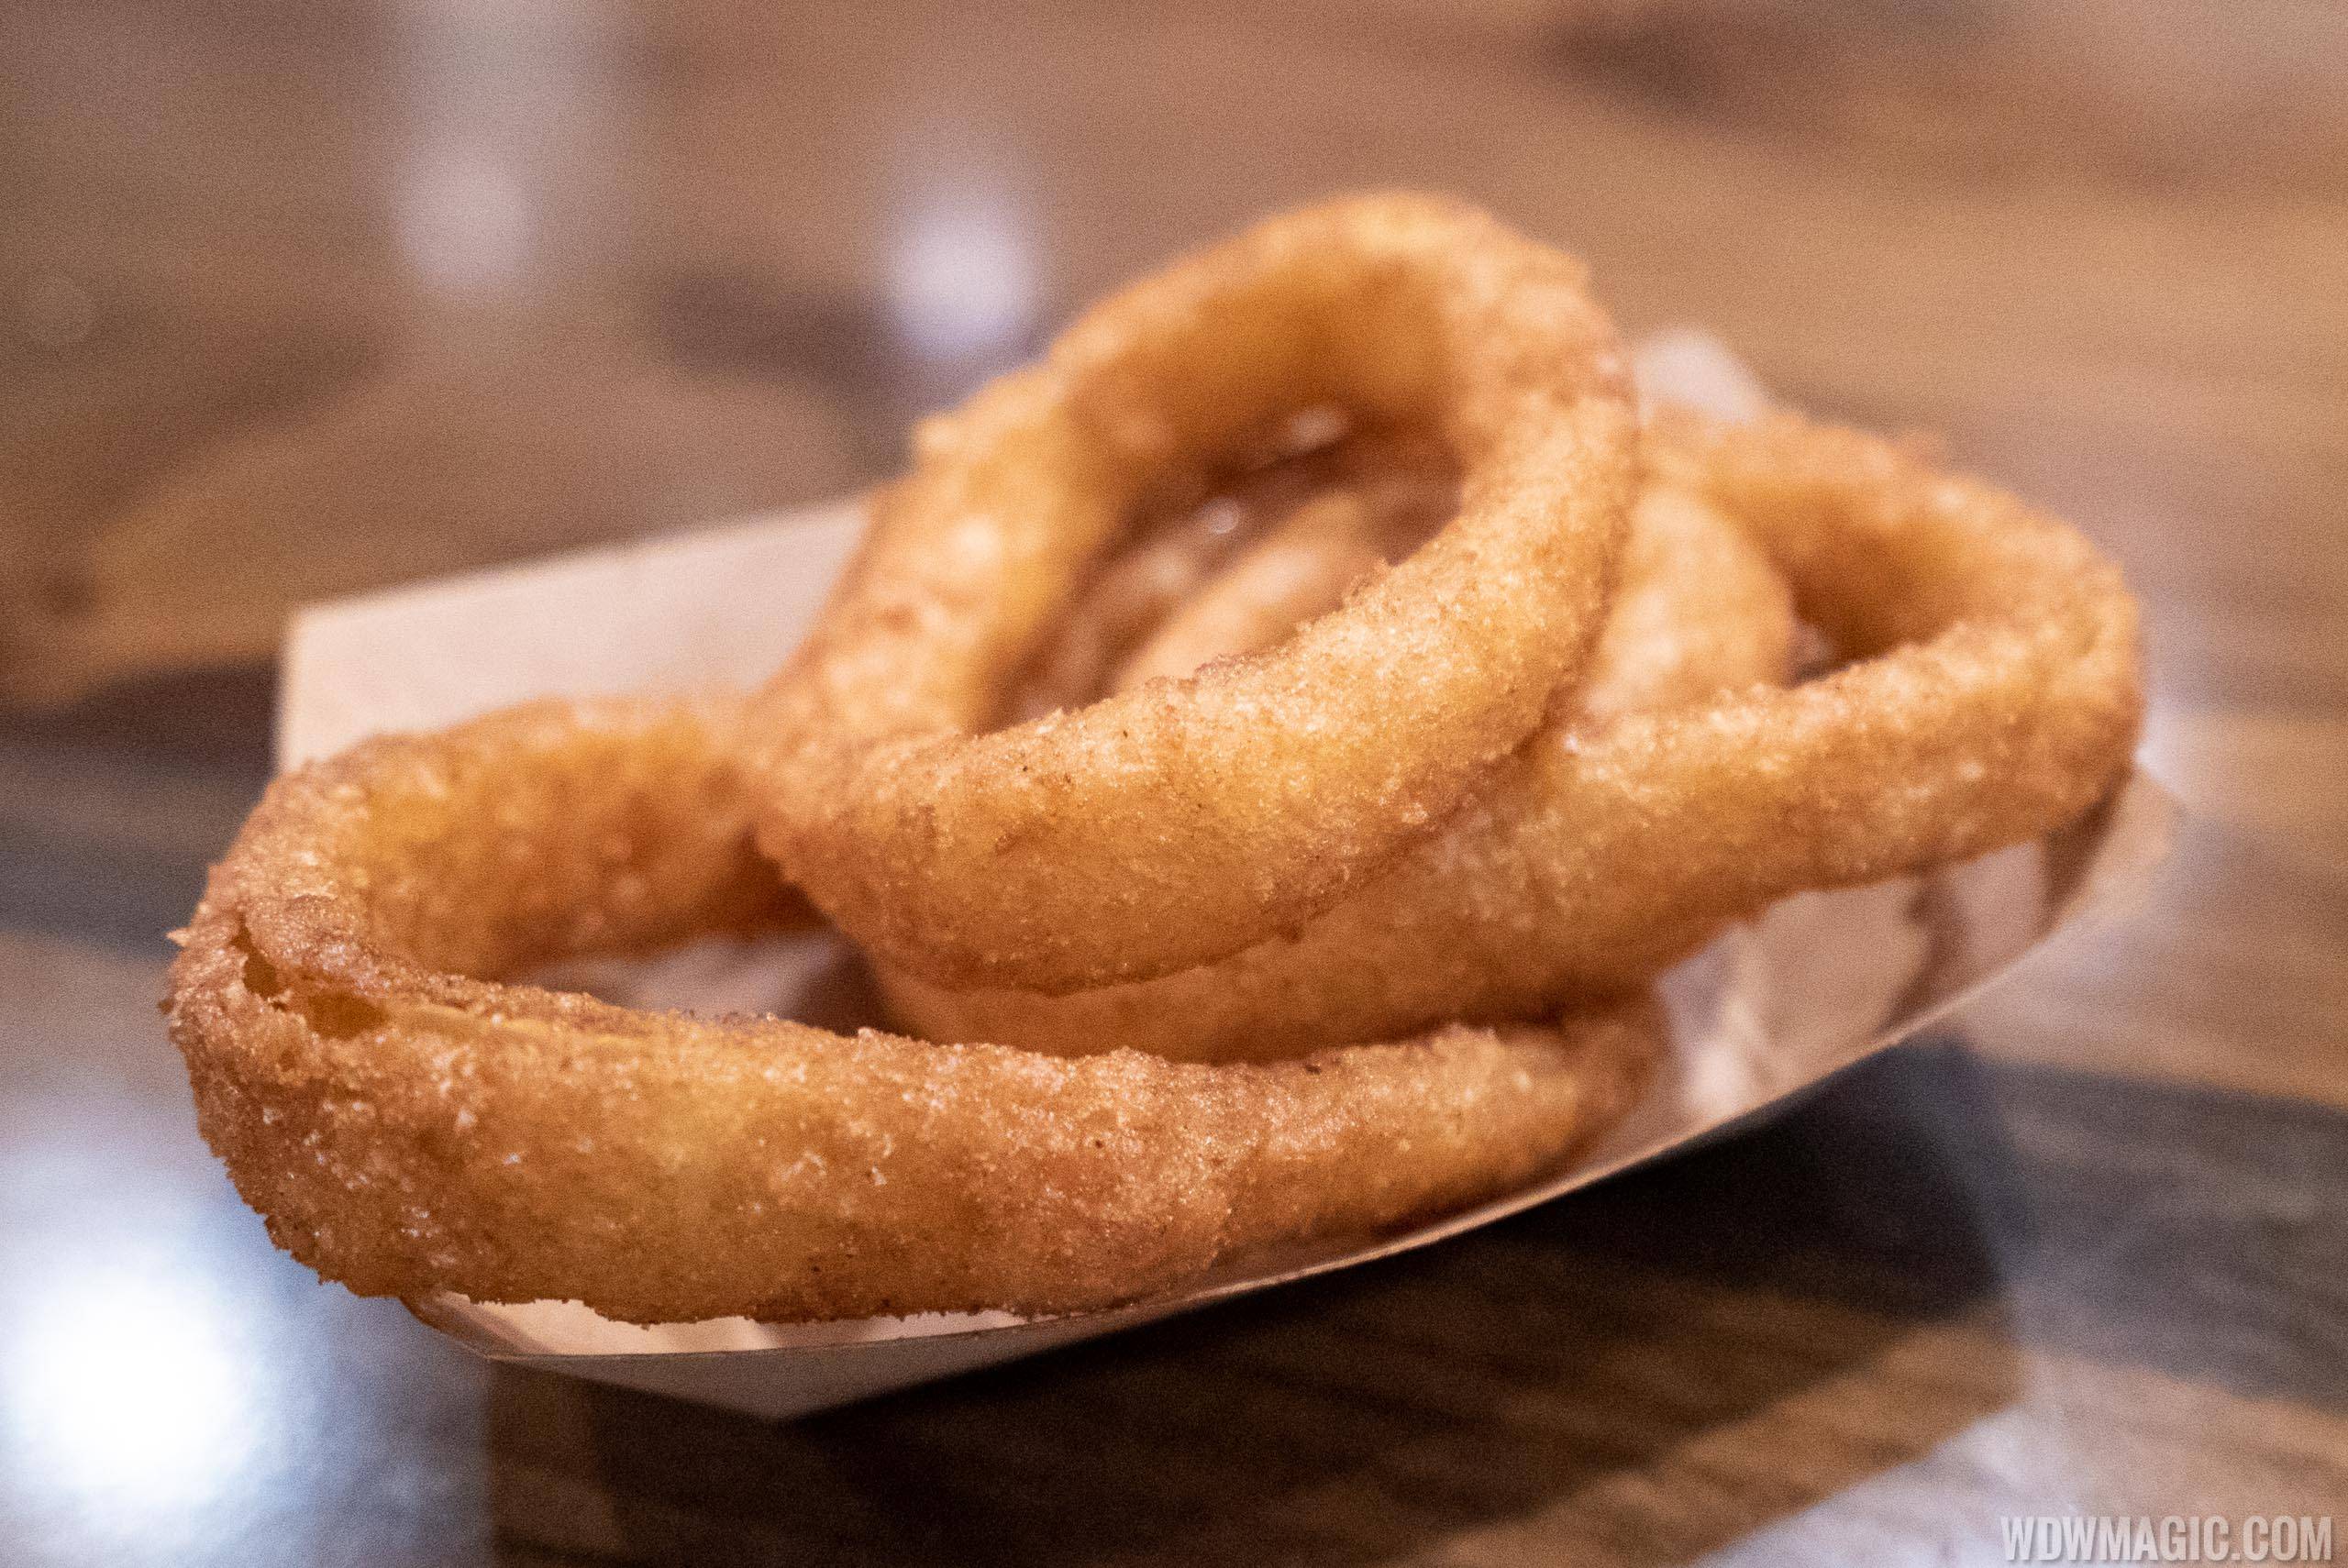 Regal Eagle Smokehouse - Beer-battered Onion Rings